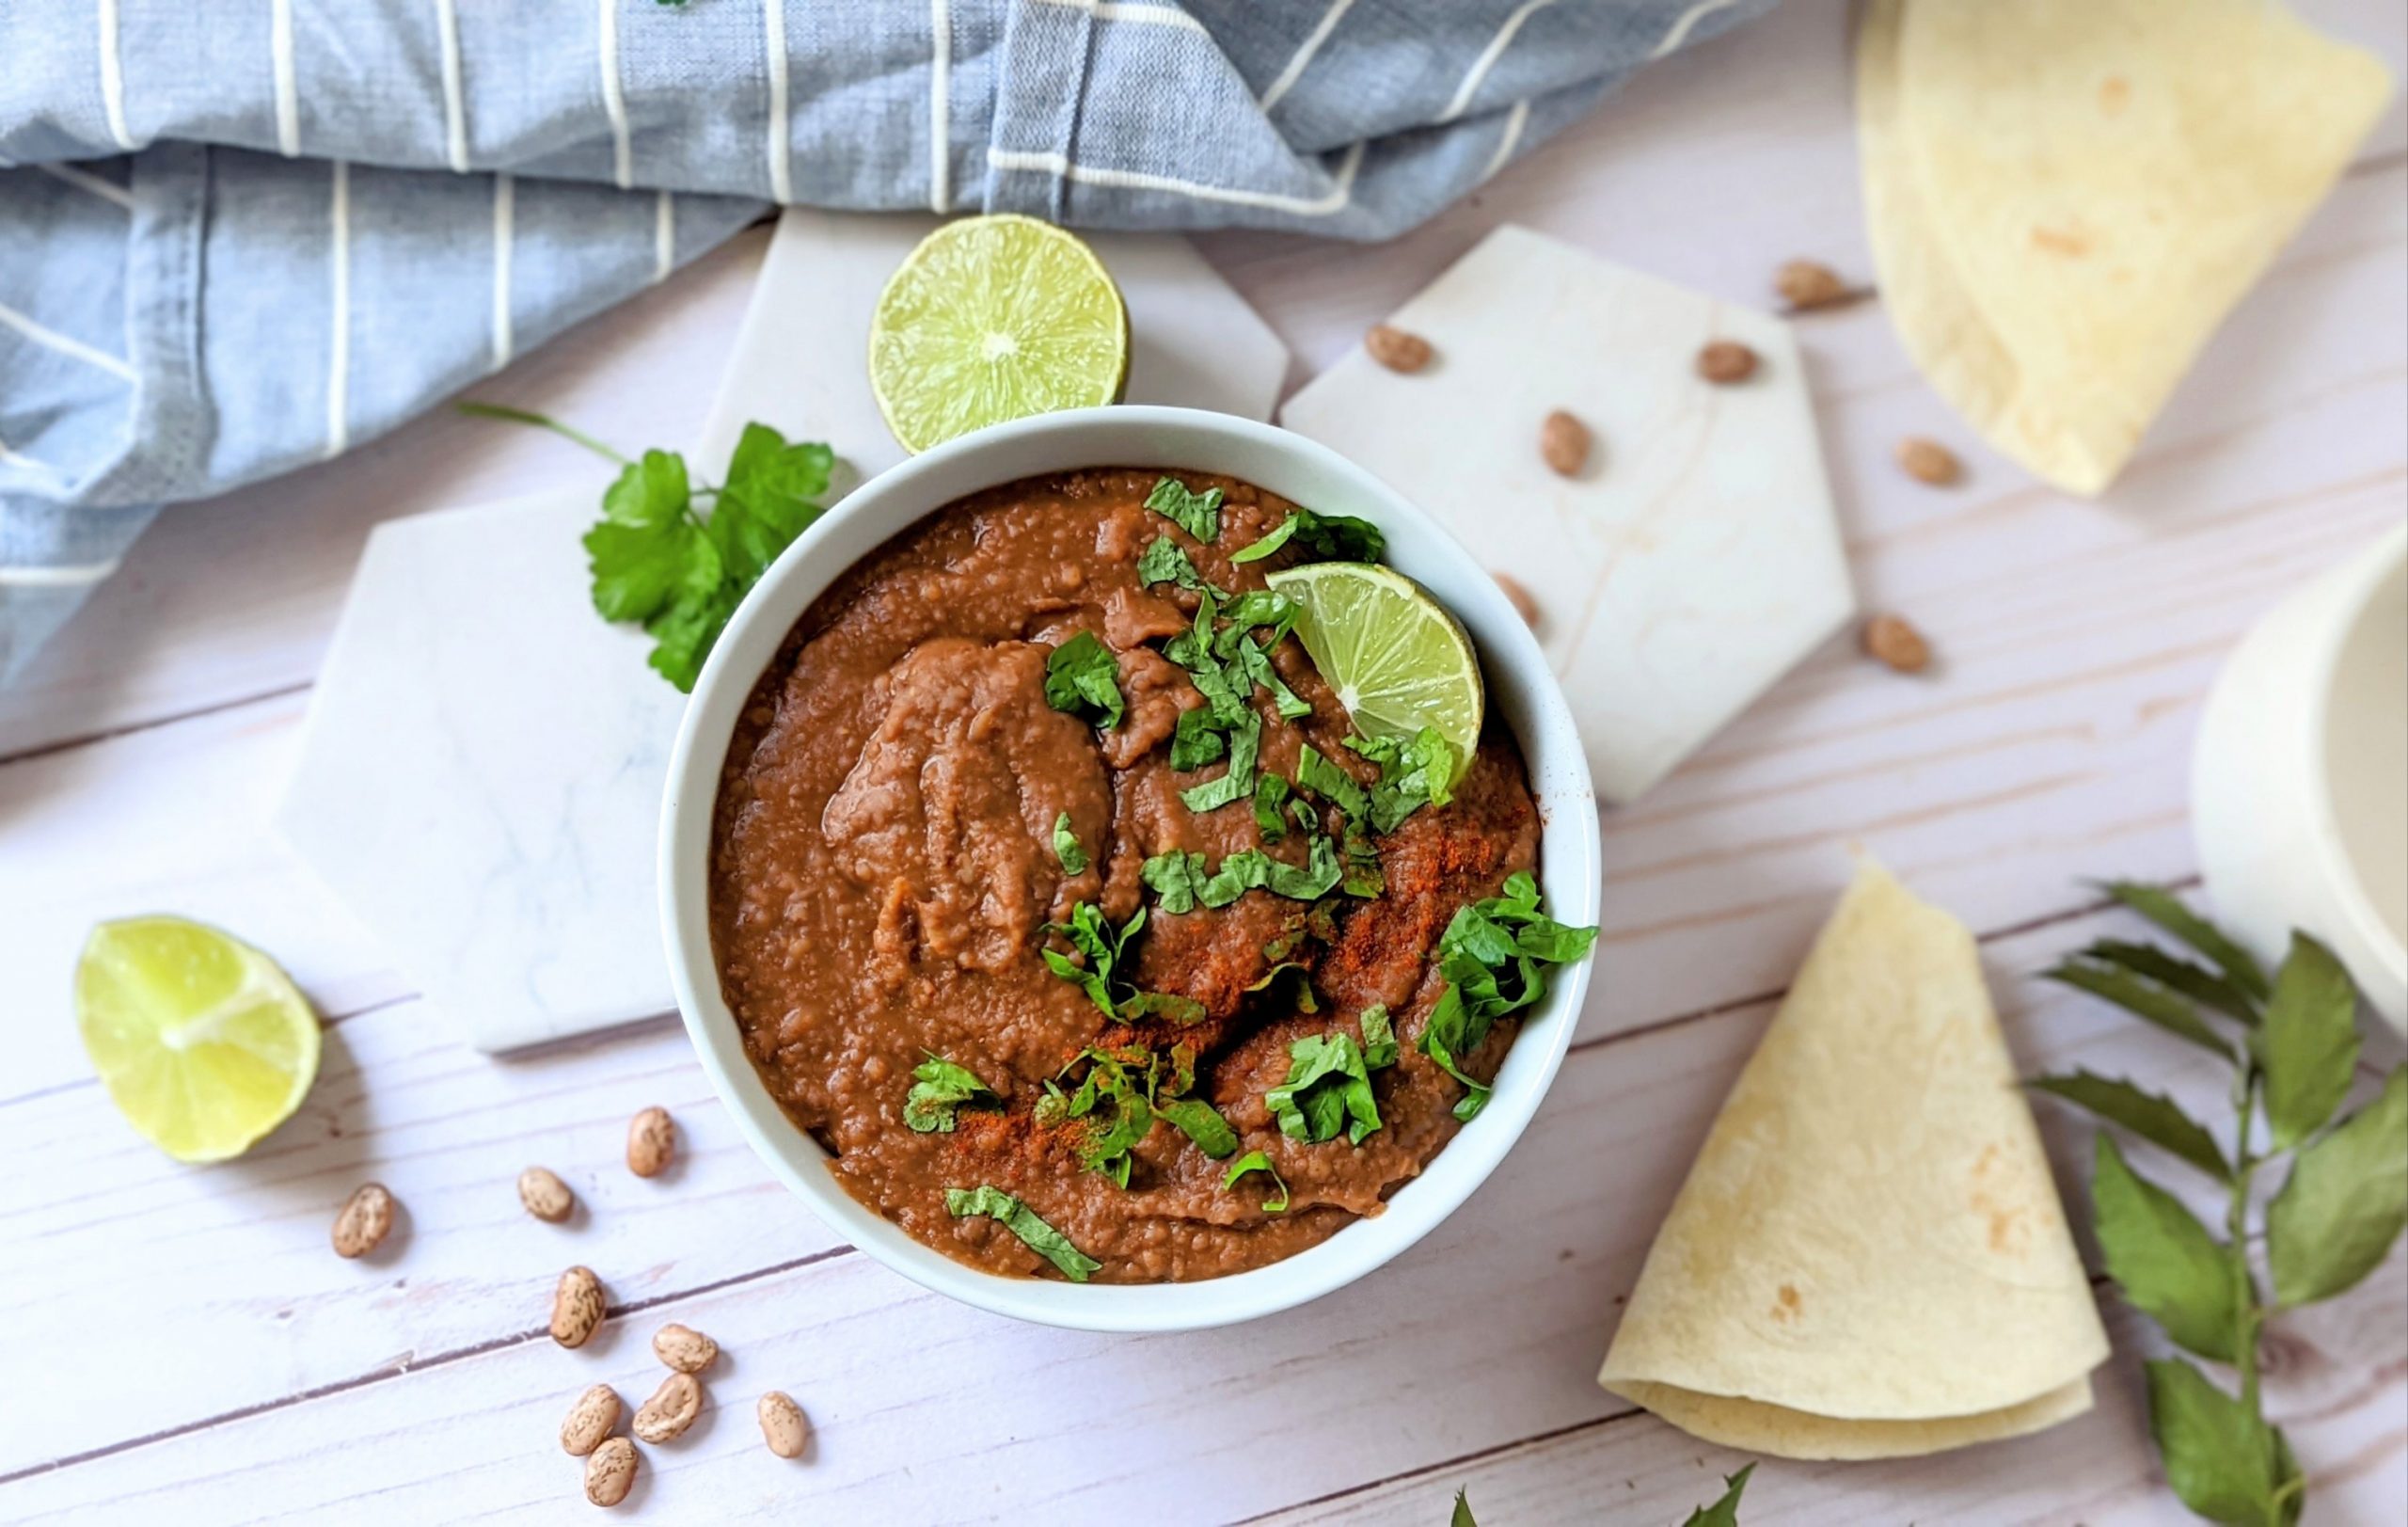 low sodium refried beans recipe healthy gluten free vegan vegetarian refried beans no oil or salt added healthy beans for high blood pressure